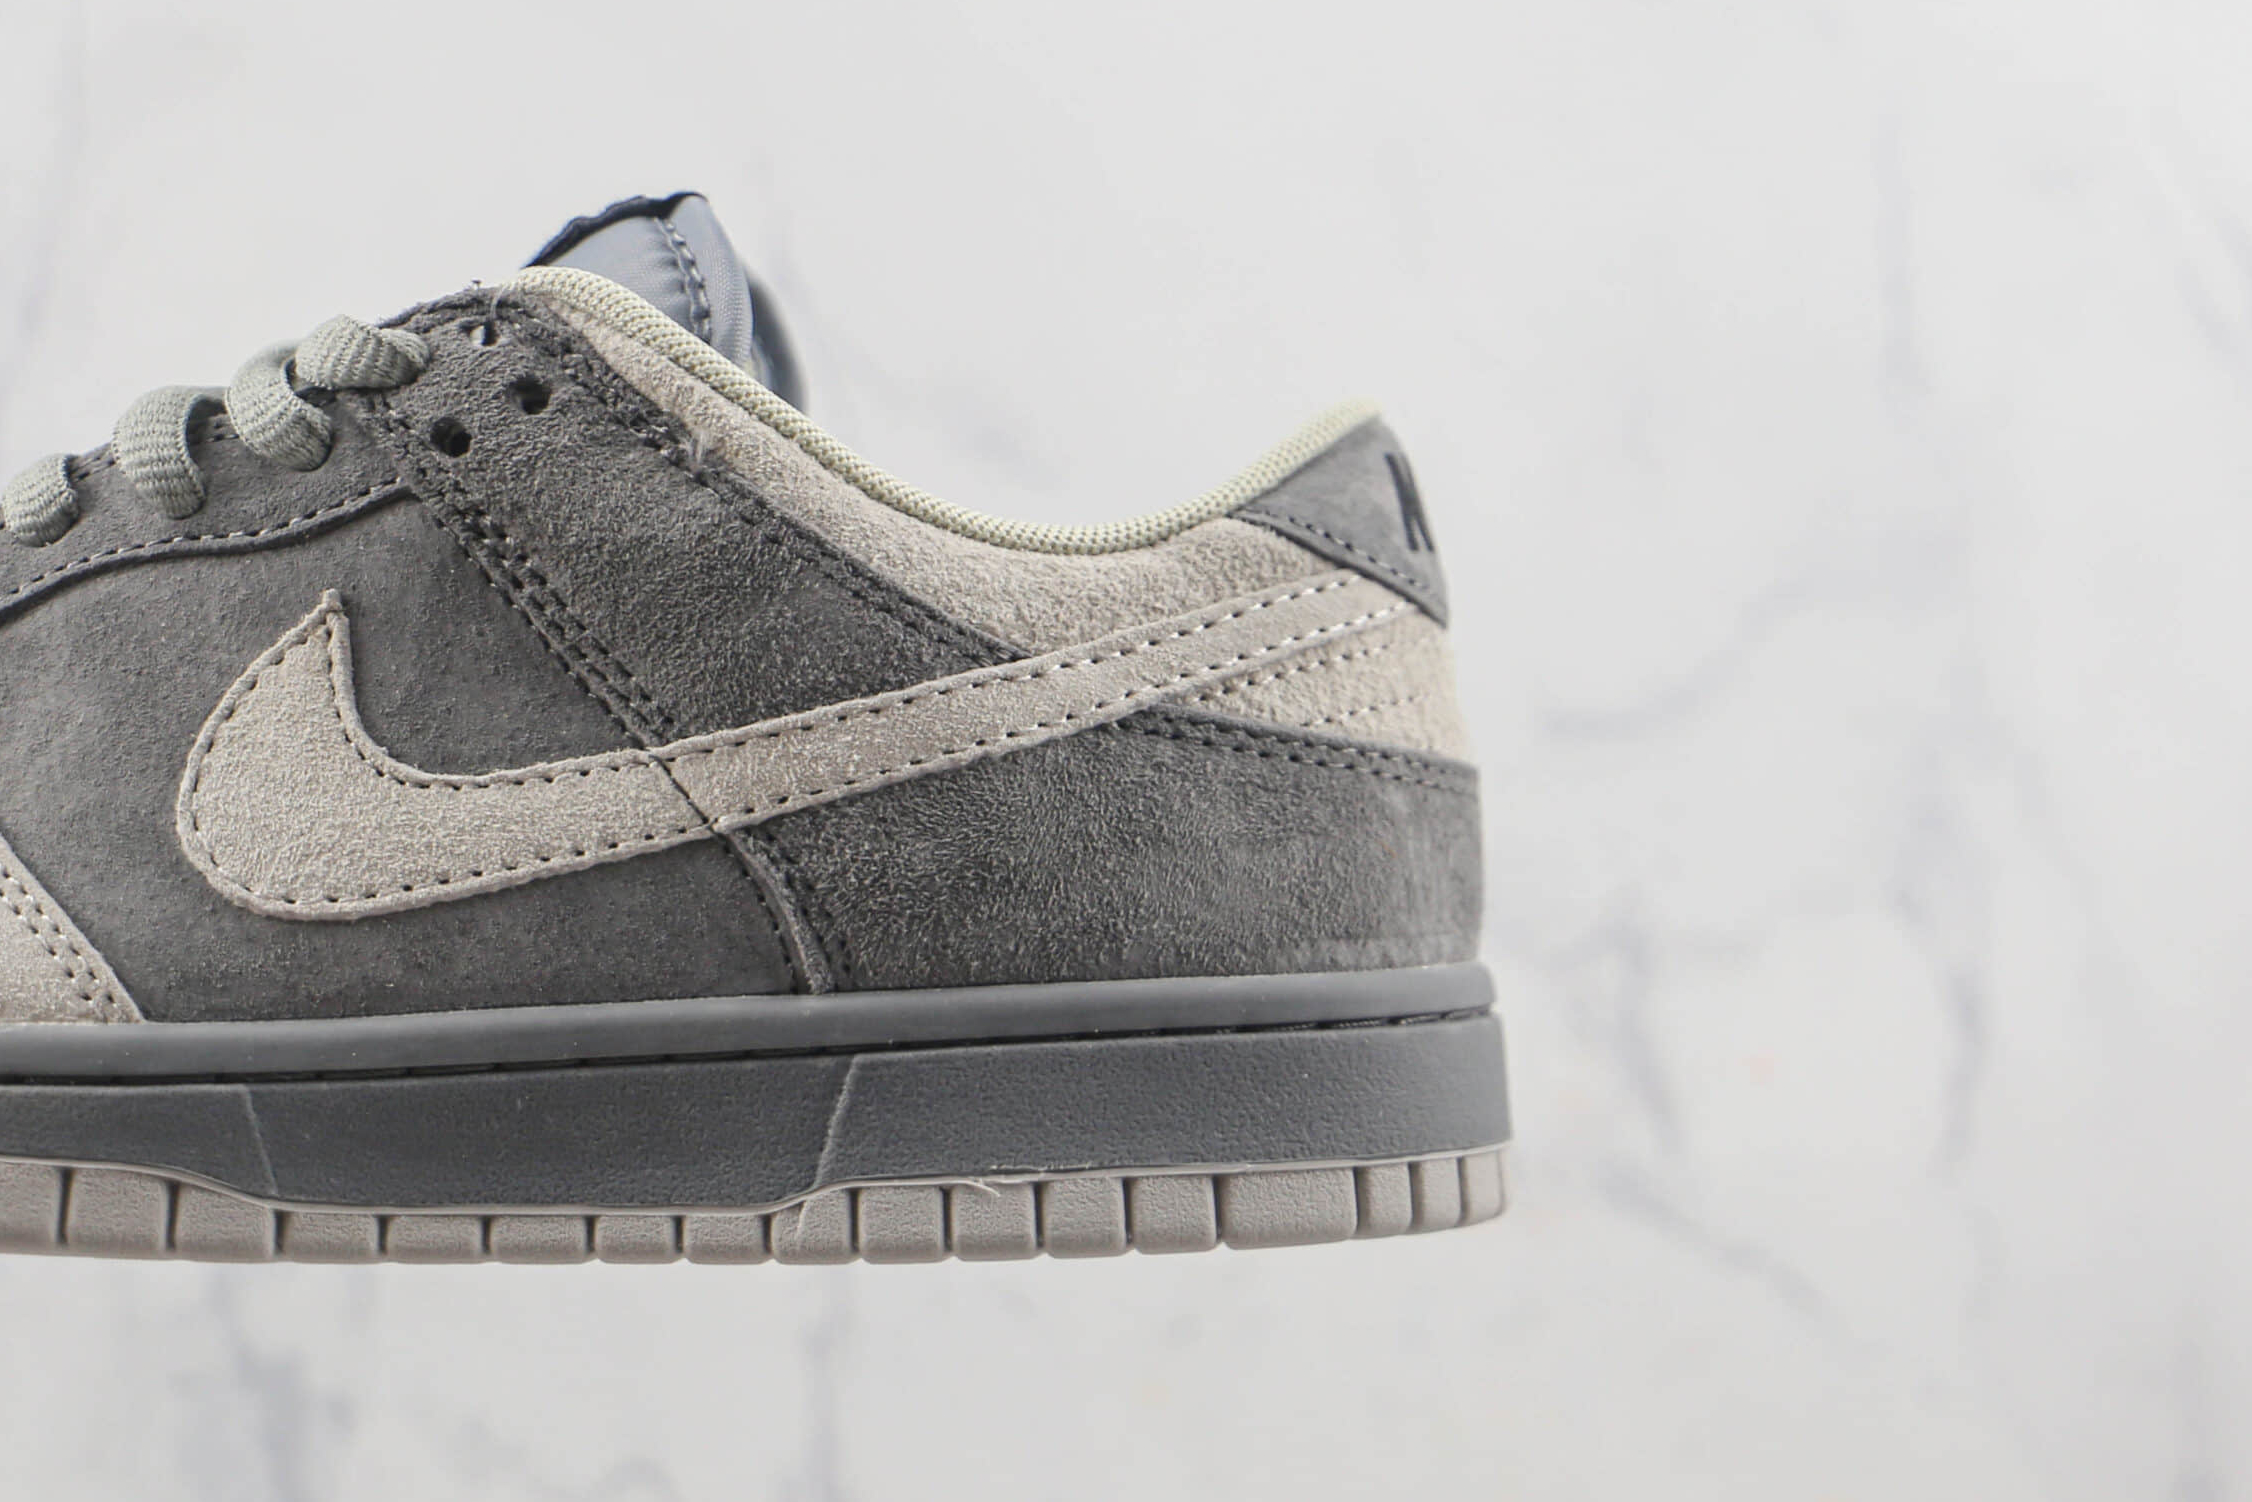 Nike Dunk SB Low Grey - Stylish and Versatile Sneakers for Men | Best Prices